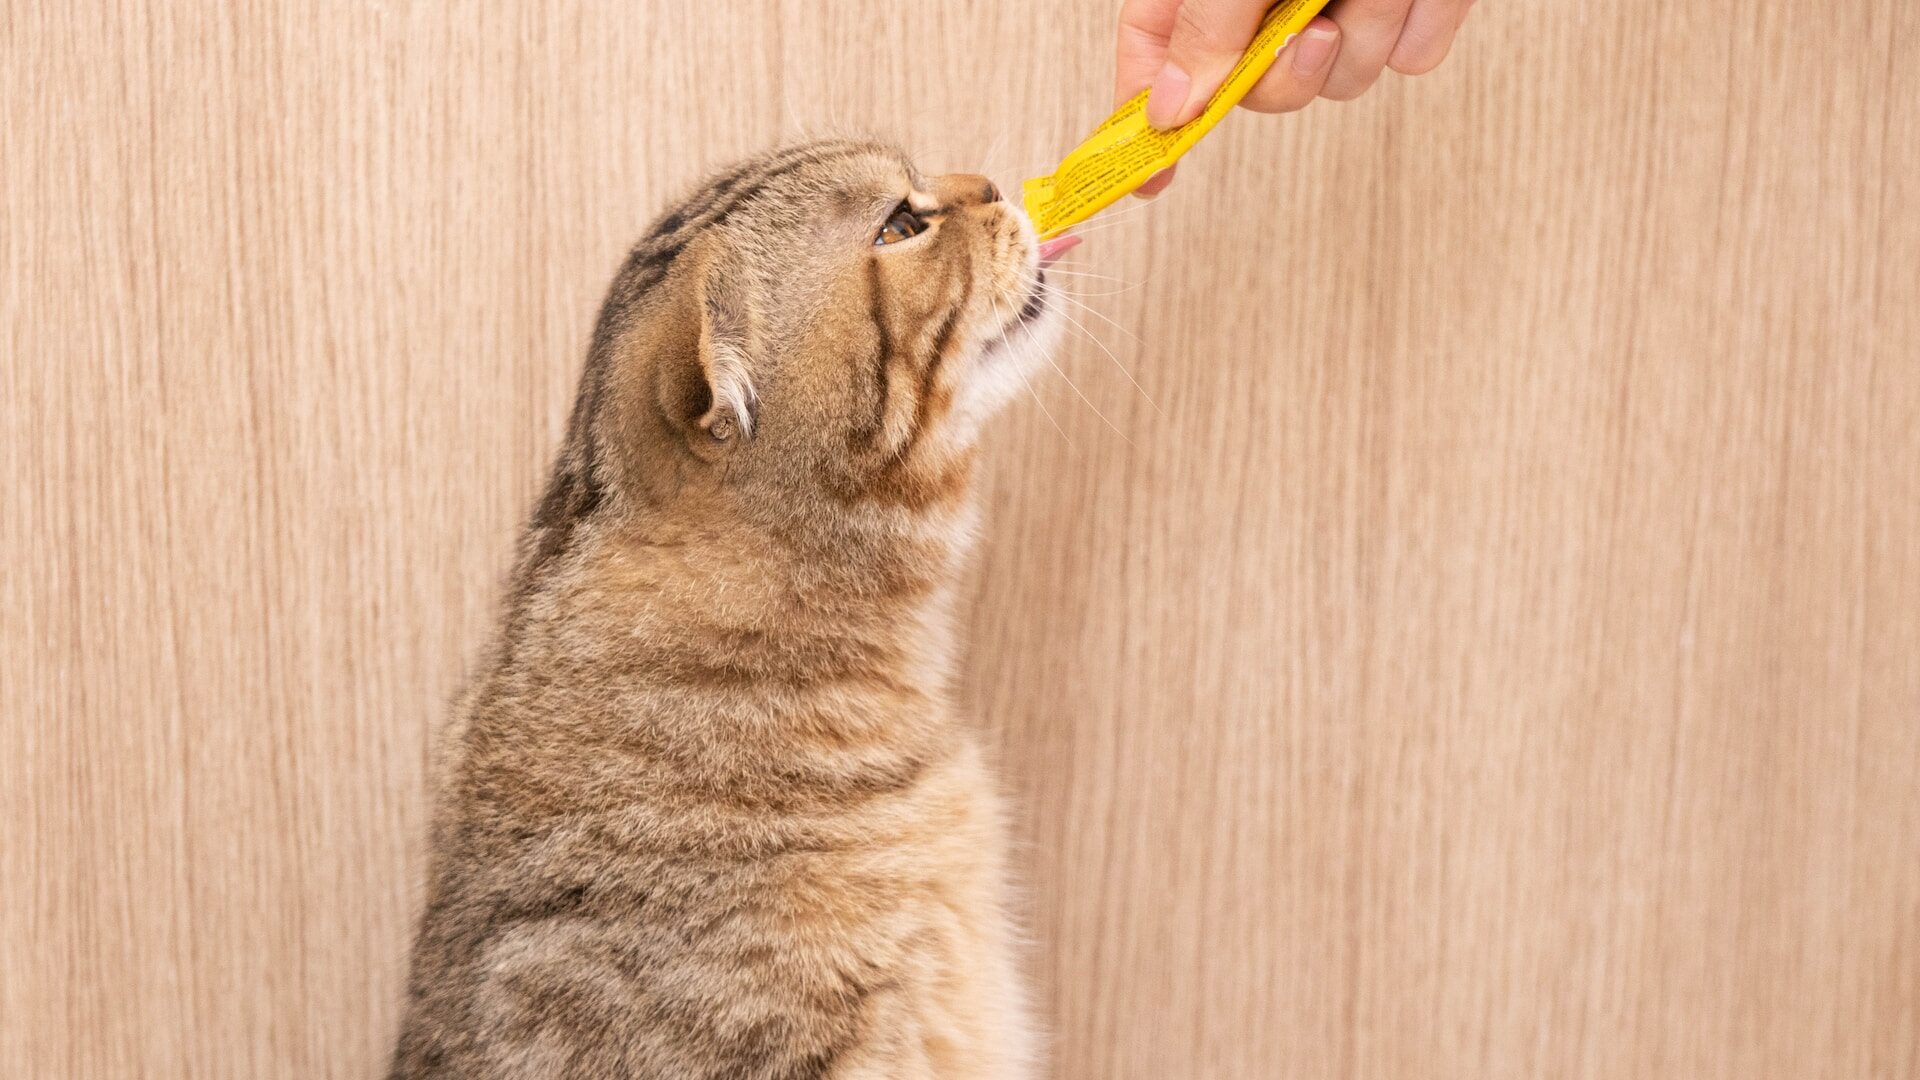 A cat licking food from a tube